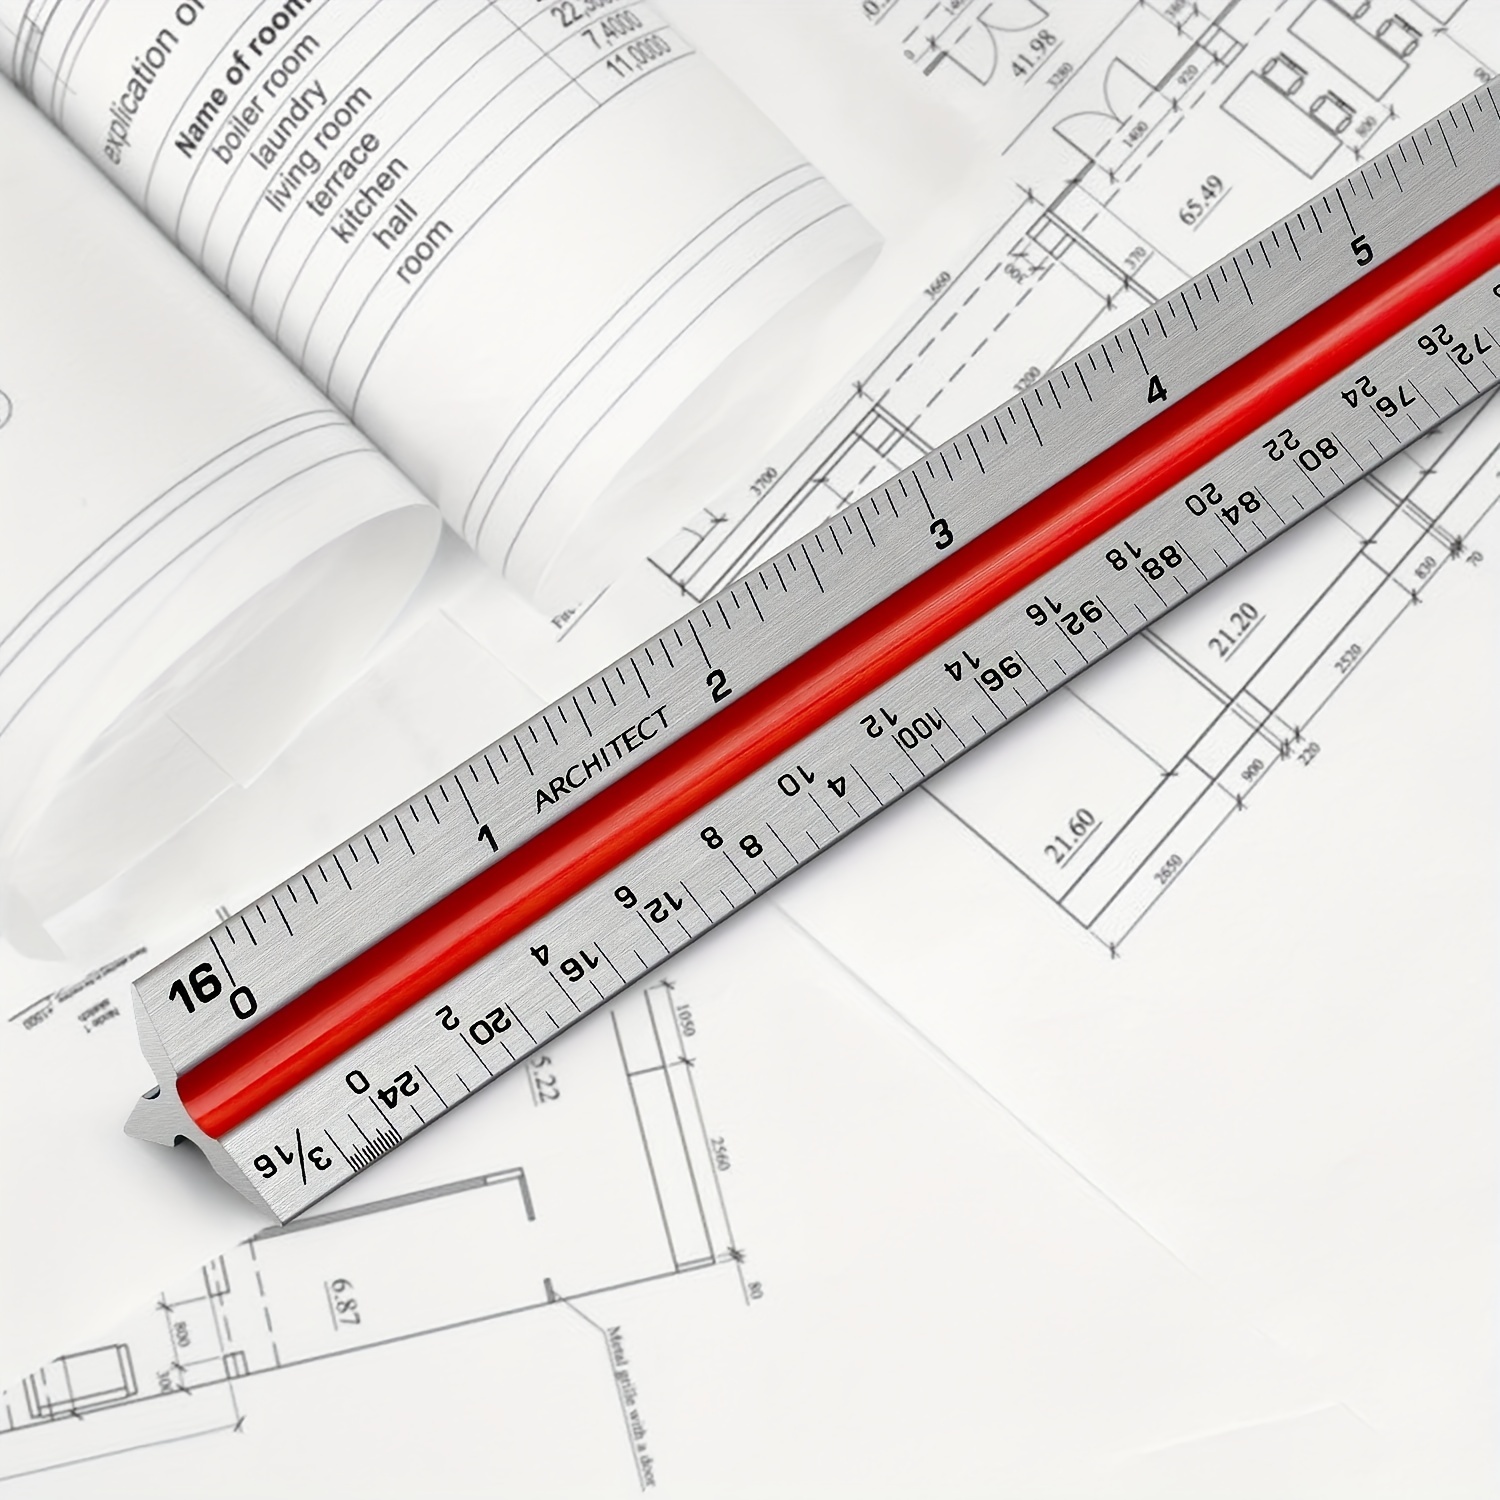 Triangular, Architectural, Aluminum Scale Ruler for Blueprint, Drafting,  Color-Coded, 12 Inches A. White